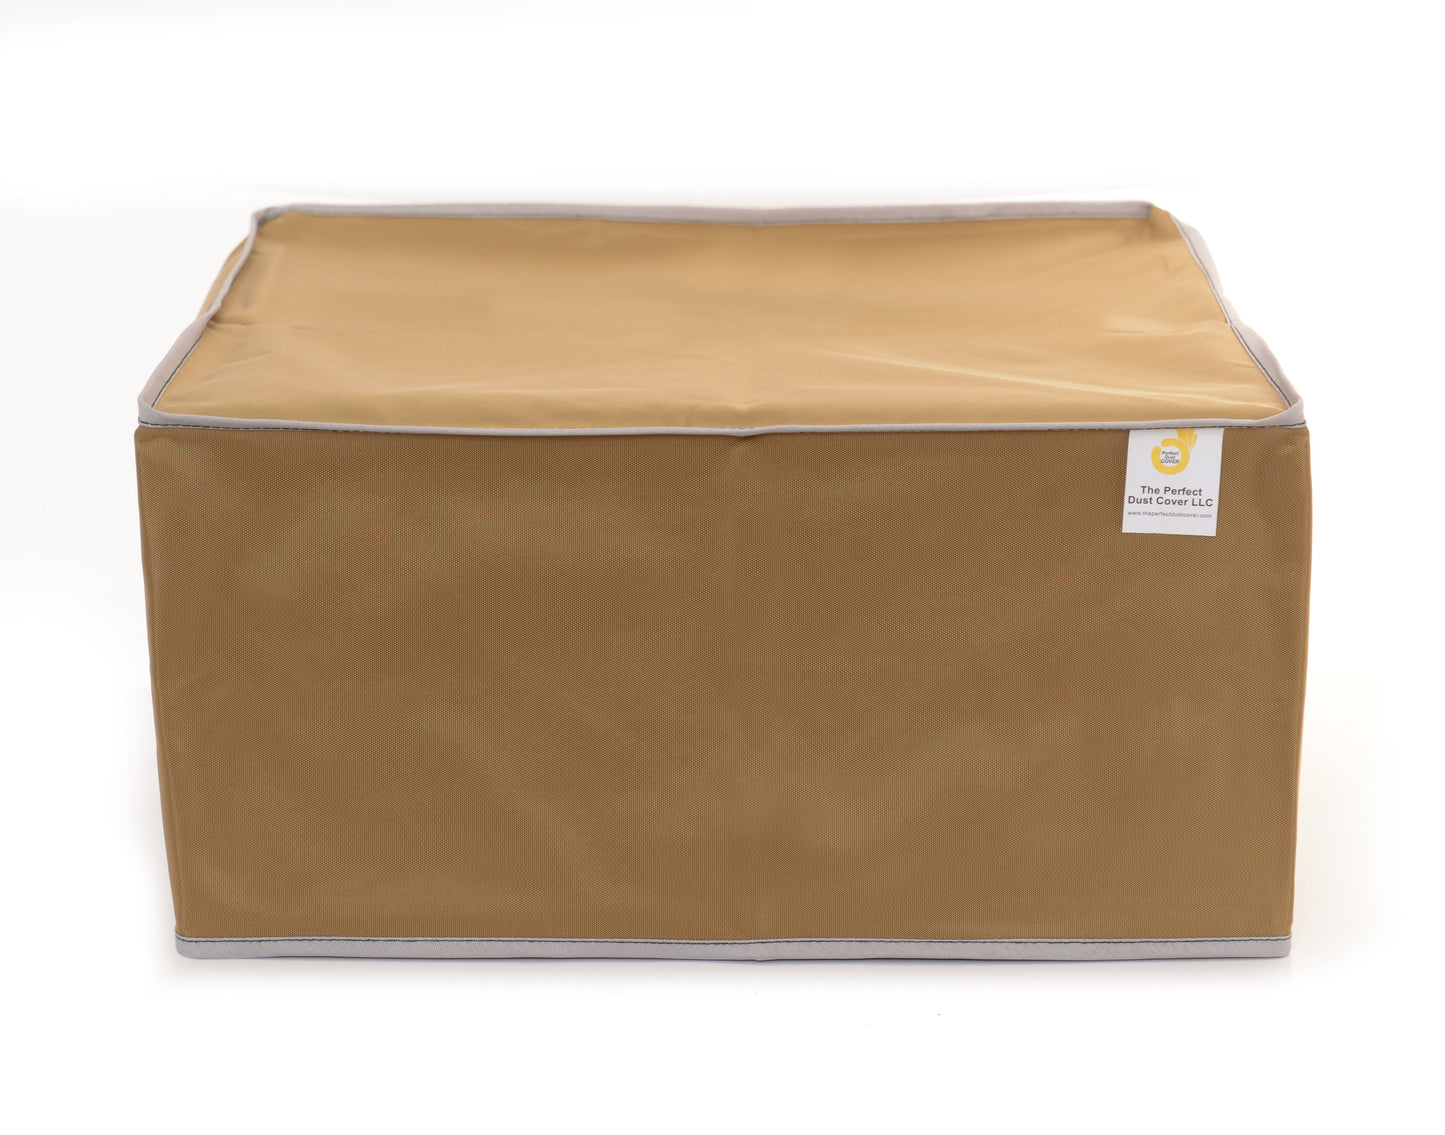 The Perfect Dust Cover, Tan Nylon Cover for Brother HL-L3290CDW Compact Digital Laser Printer, Anti Static, Waterproof Cover Dimensions 16.1''W x 18.7''D x 14.5''H by The Perfect Dust Cover LLC